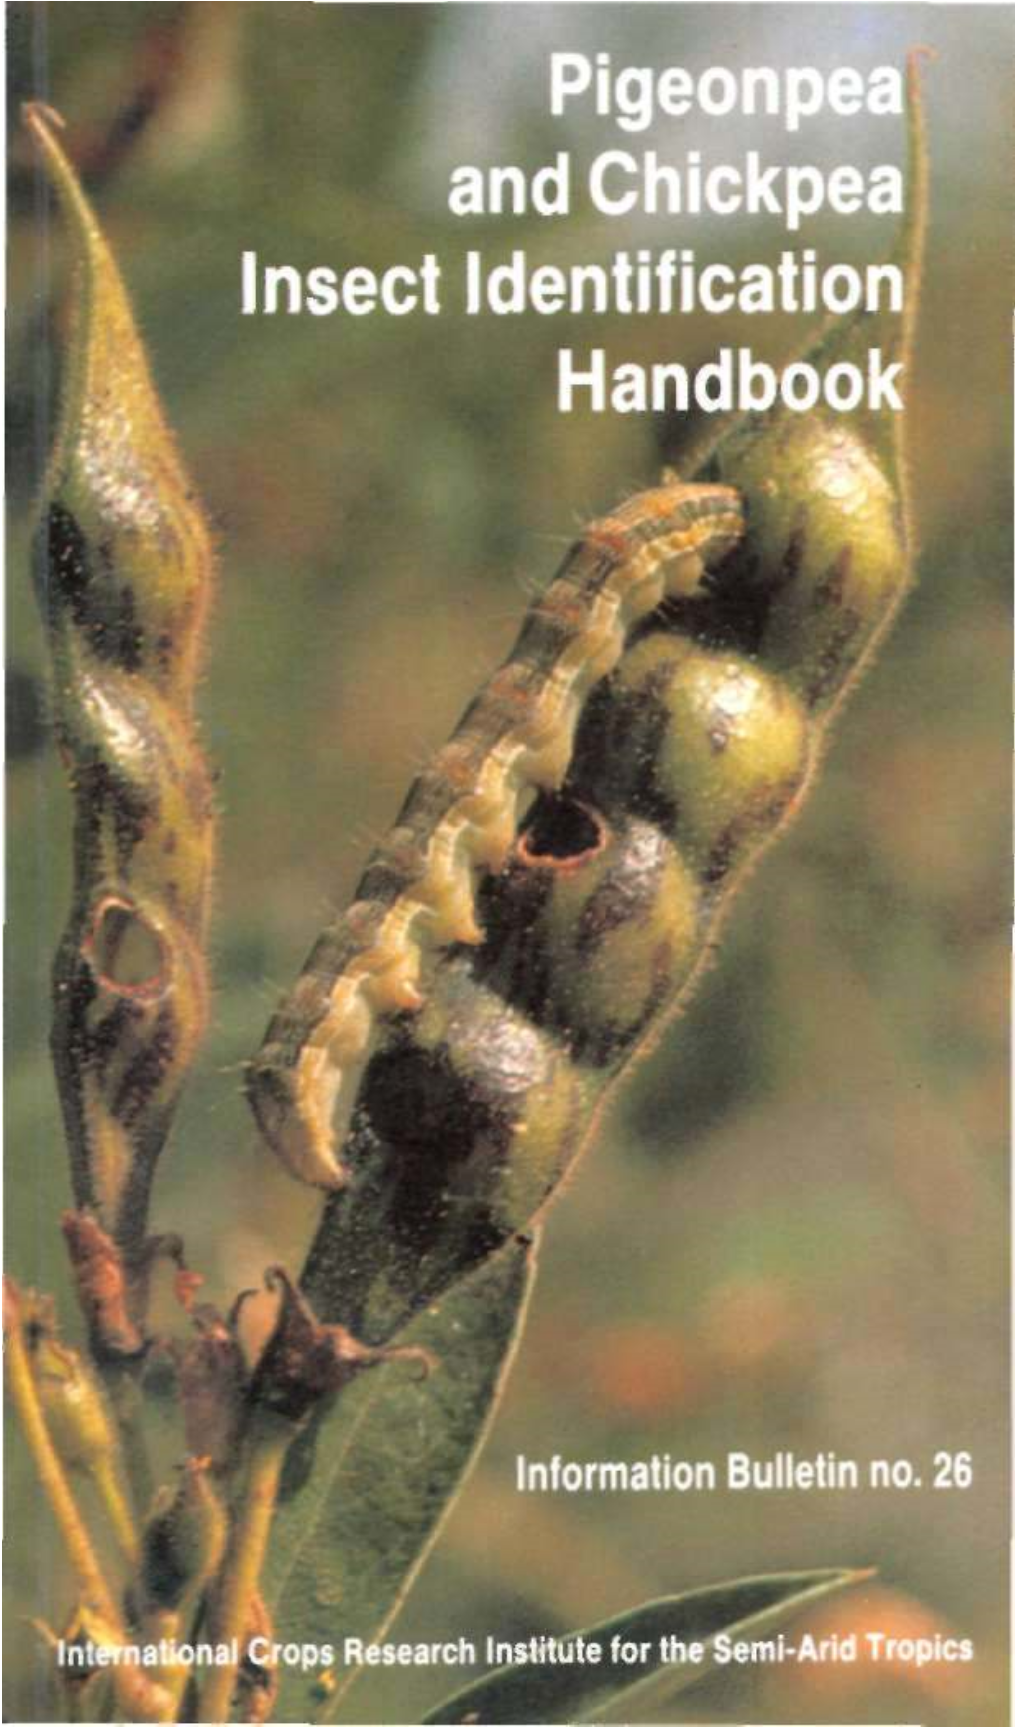 Pigeonpea and Chickpea Insect Identification Handbook